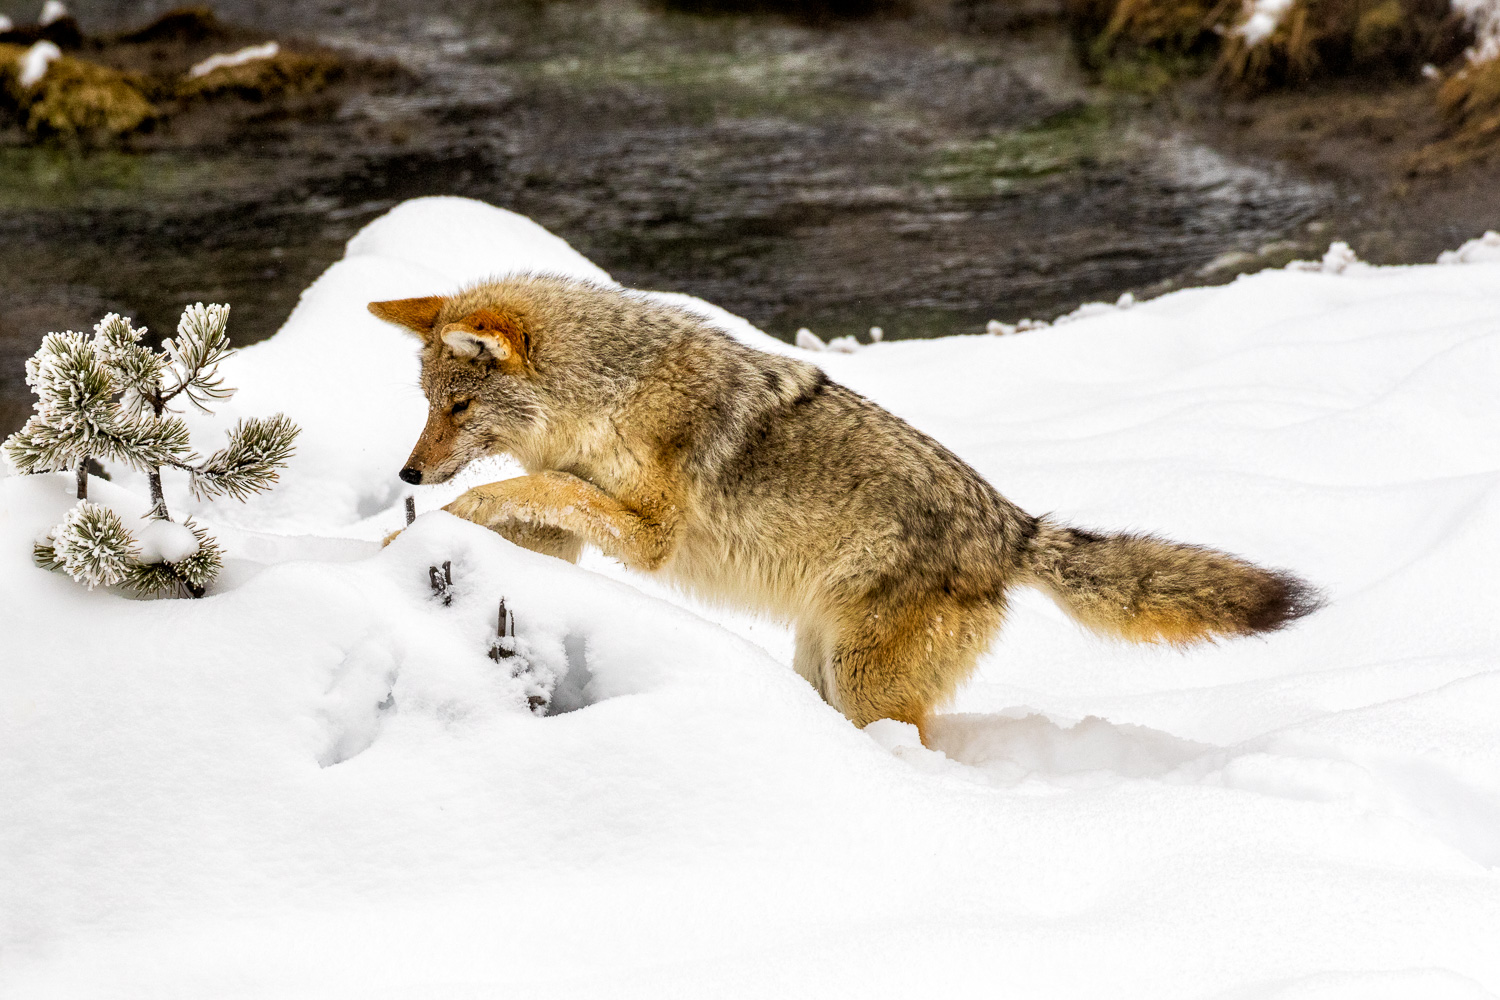 Coyote Hunting in the Snow